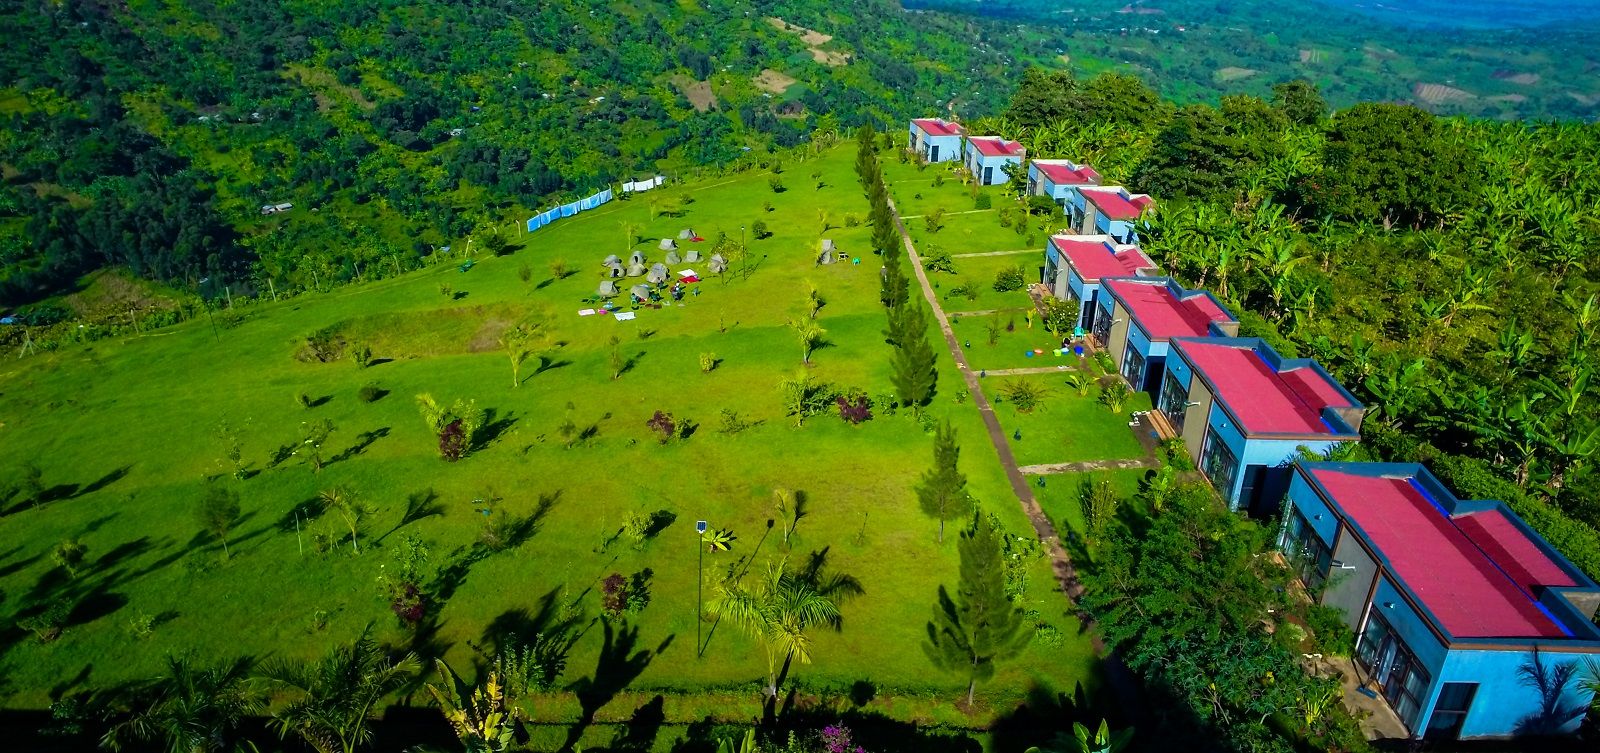 Sipi Valley Resort located on the slopes of Mount Elgon